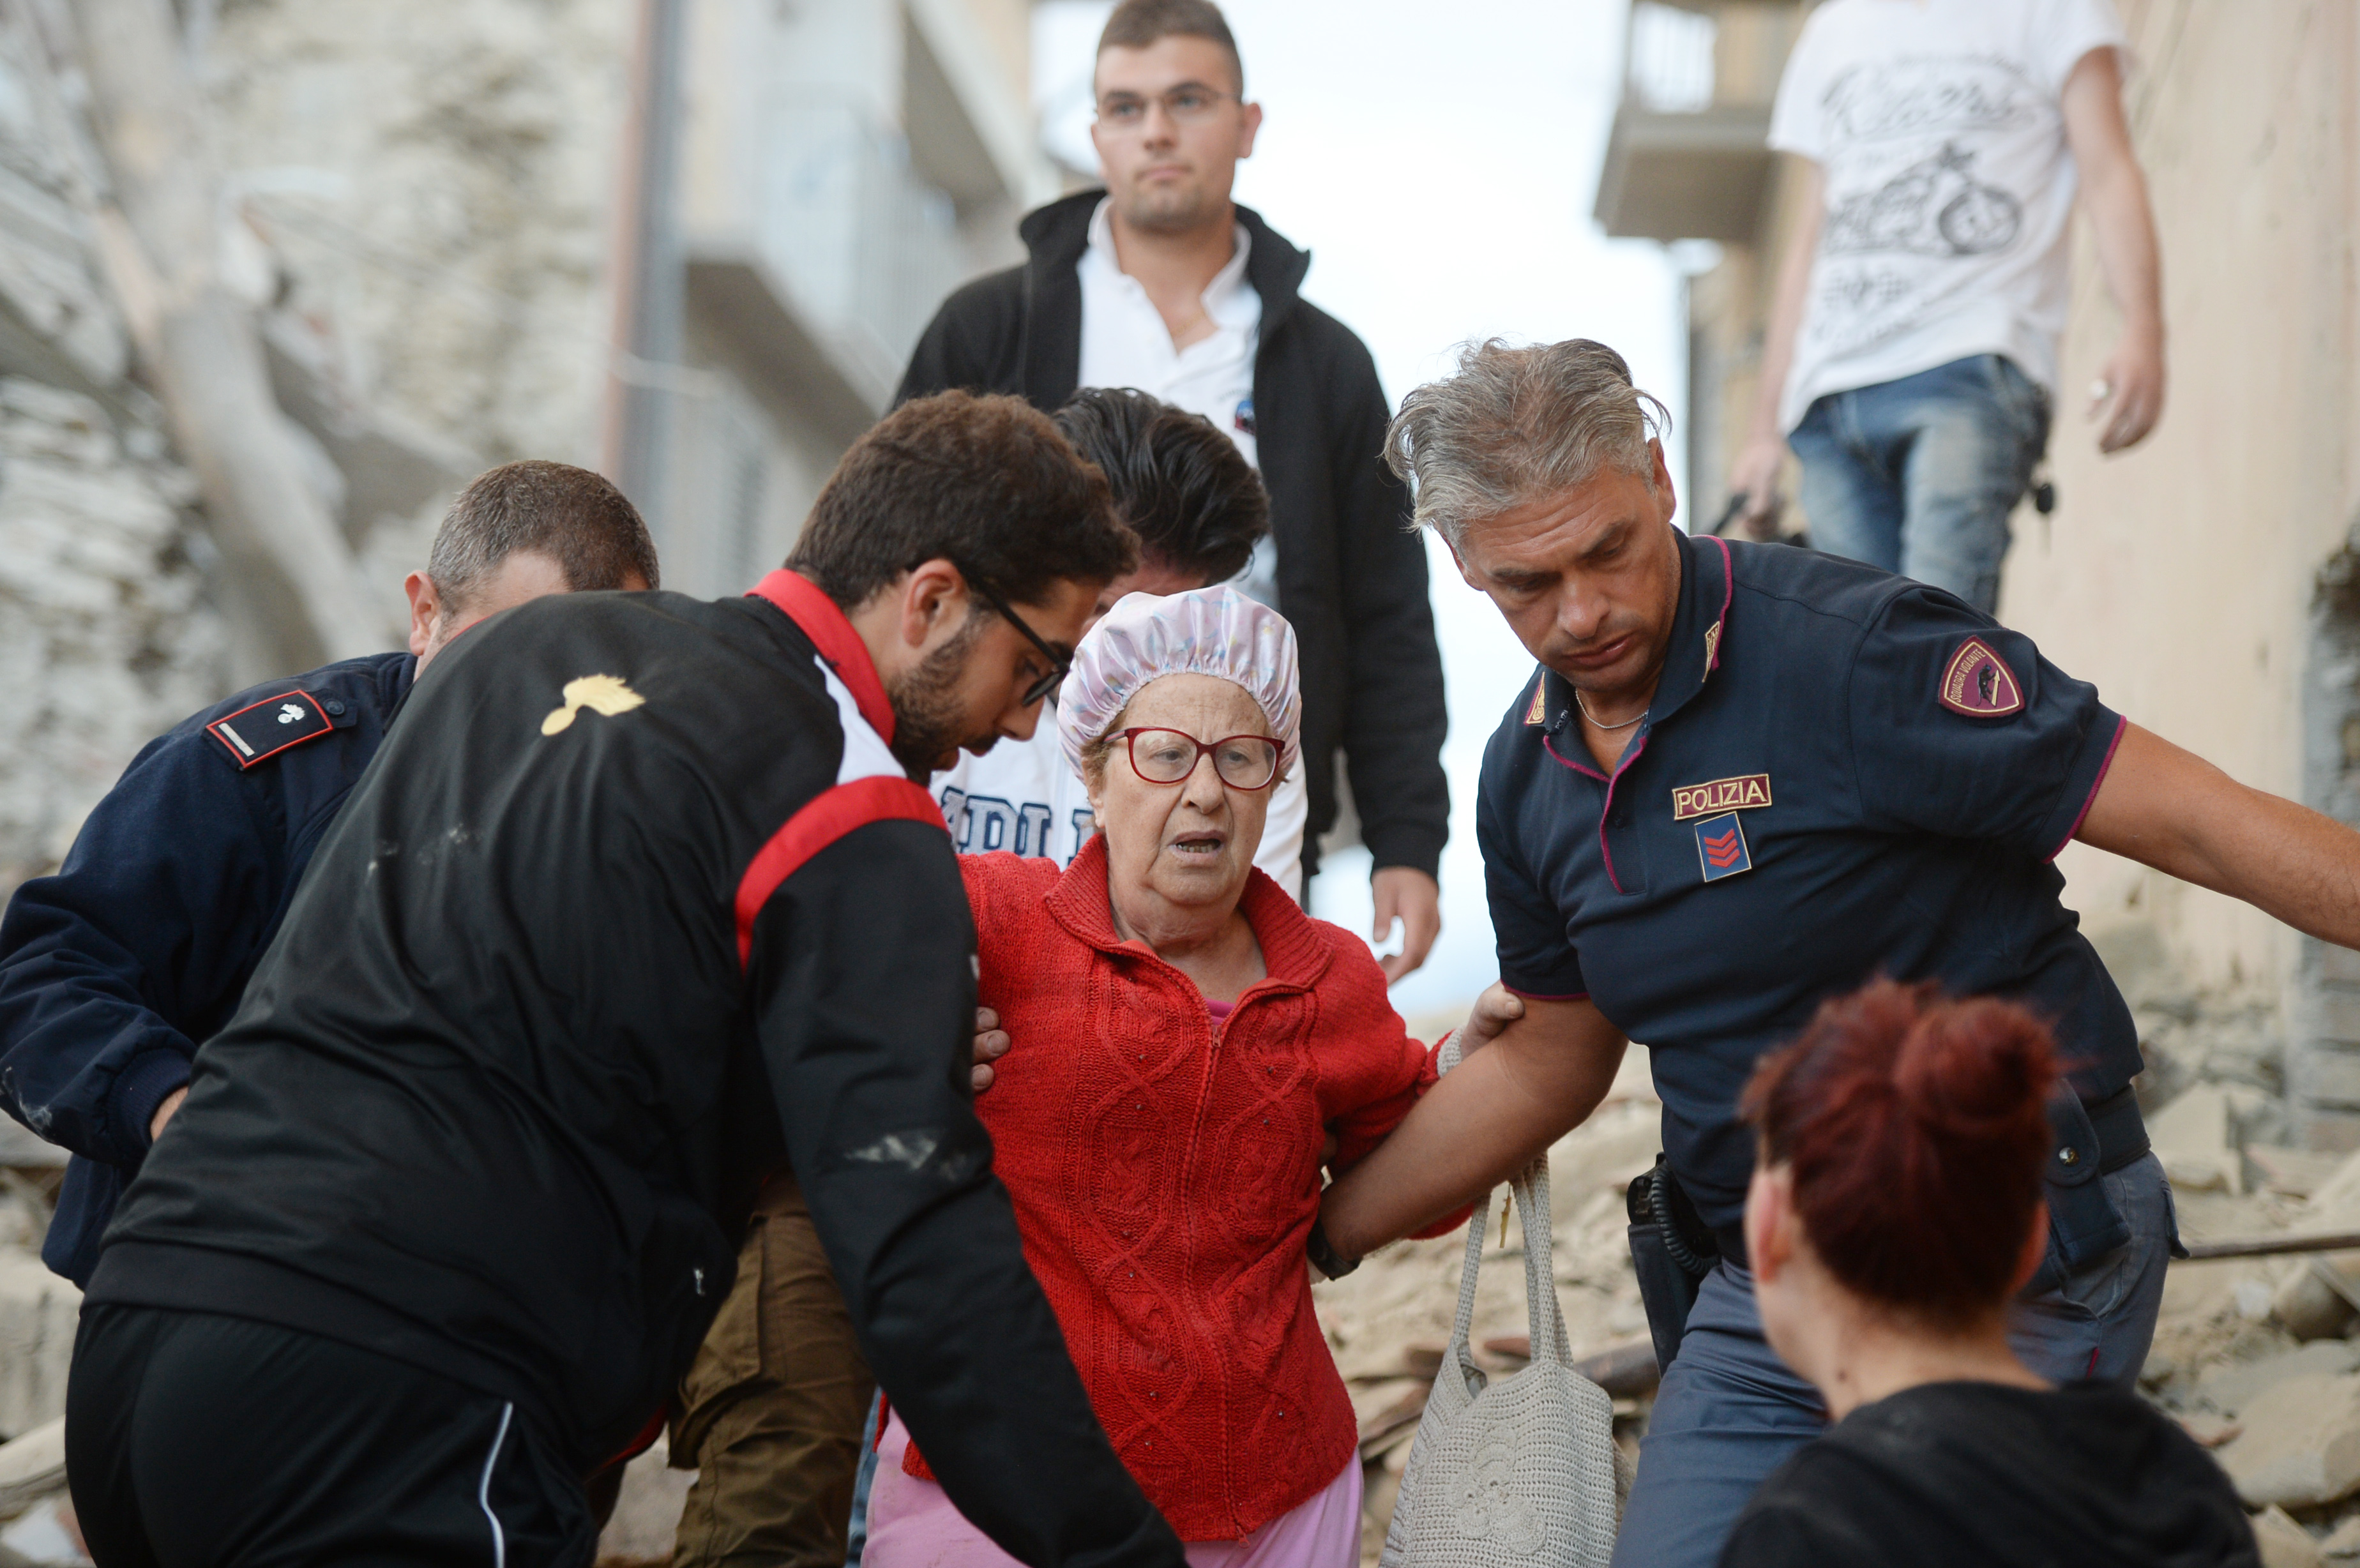 Rescuers help a woman among damaged buildings after a strong heartquake hit Amatrice on August 24, 2016. Central Italy was struck by a powerful, 6.2-magnitude earthquake in the early hours, which has killed at least three people and devastated dozens of mountain villages. Numerous buildings had collapsed in communities close to the epicenter of the quake near the town of Norcia in the region of Umbria, witnesses told Italian media, with an increase in the death toll highly likely. / AFP PHOTO / FILIPPO MONTEFORTE